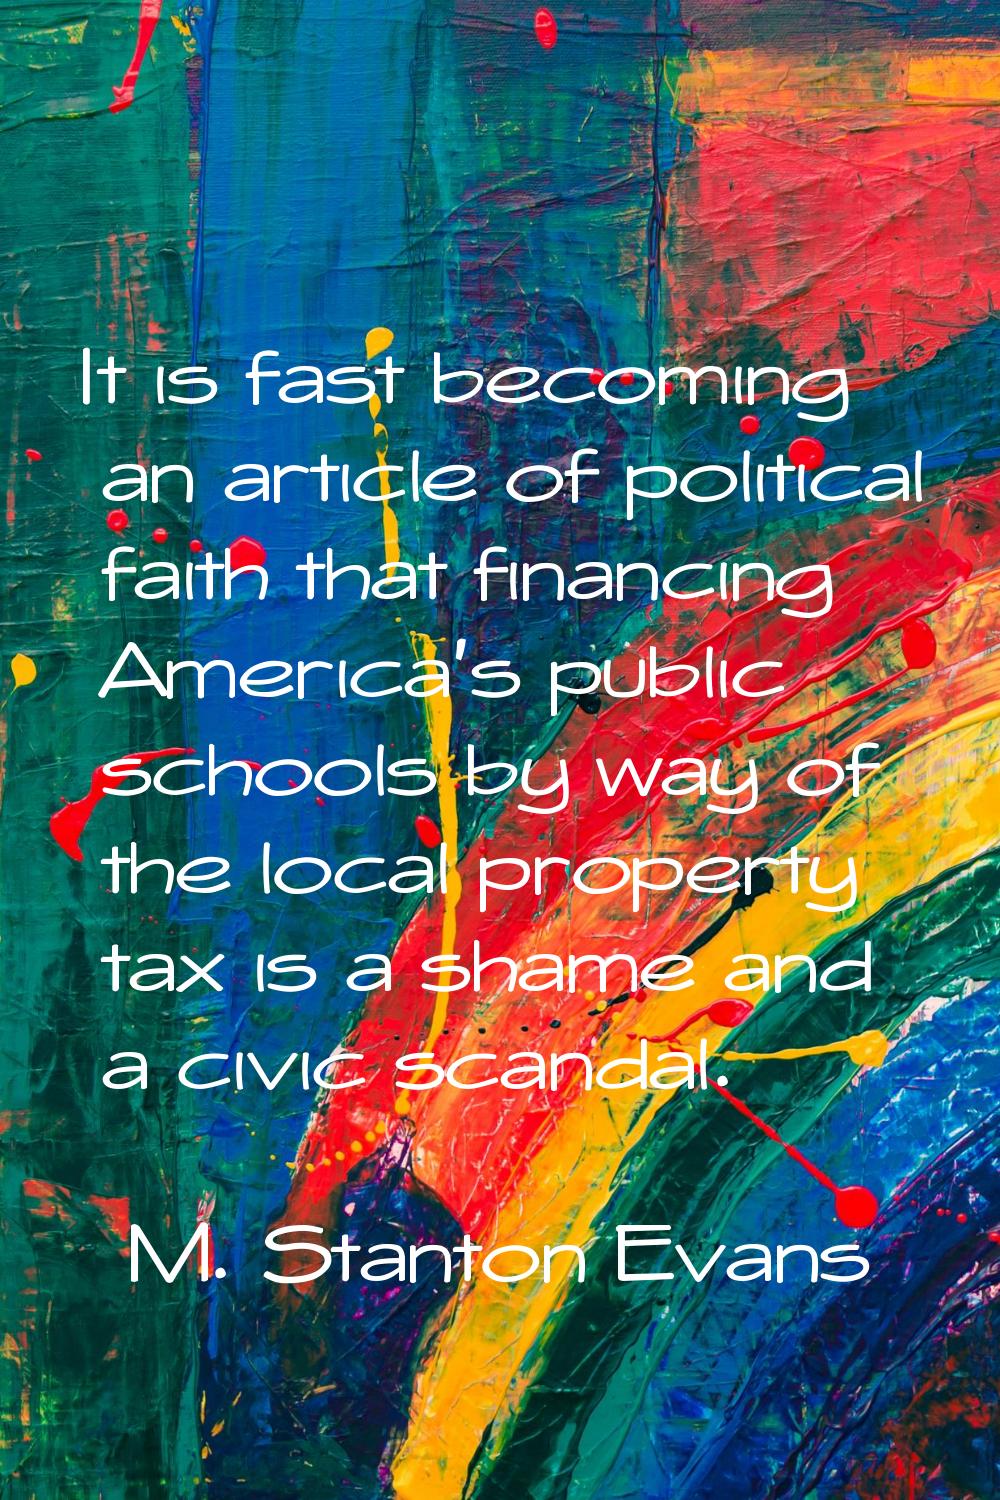 It is fast becoming an article of political faith that financing America's public schools by way of